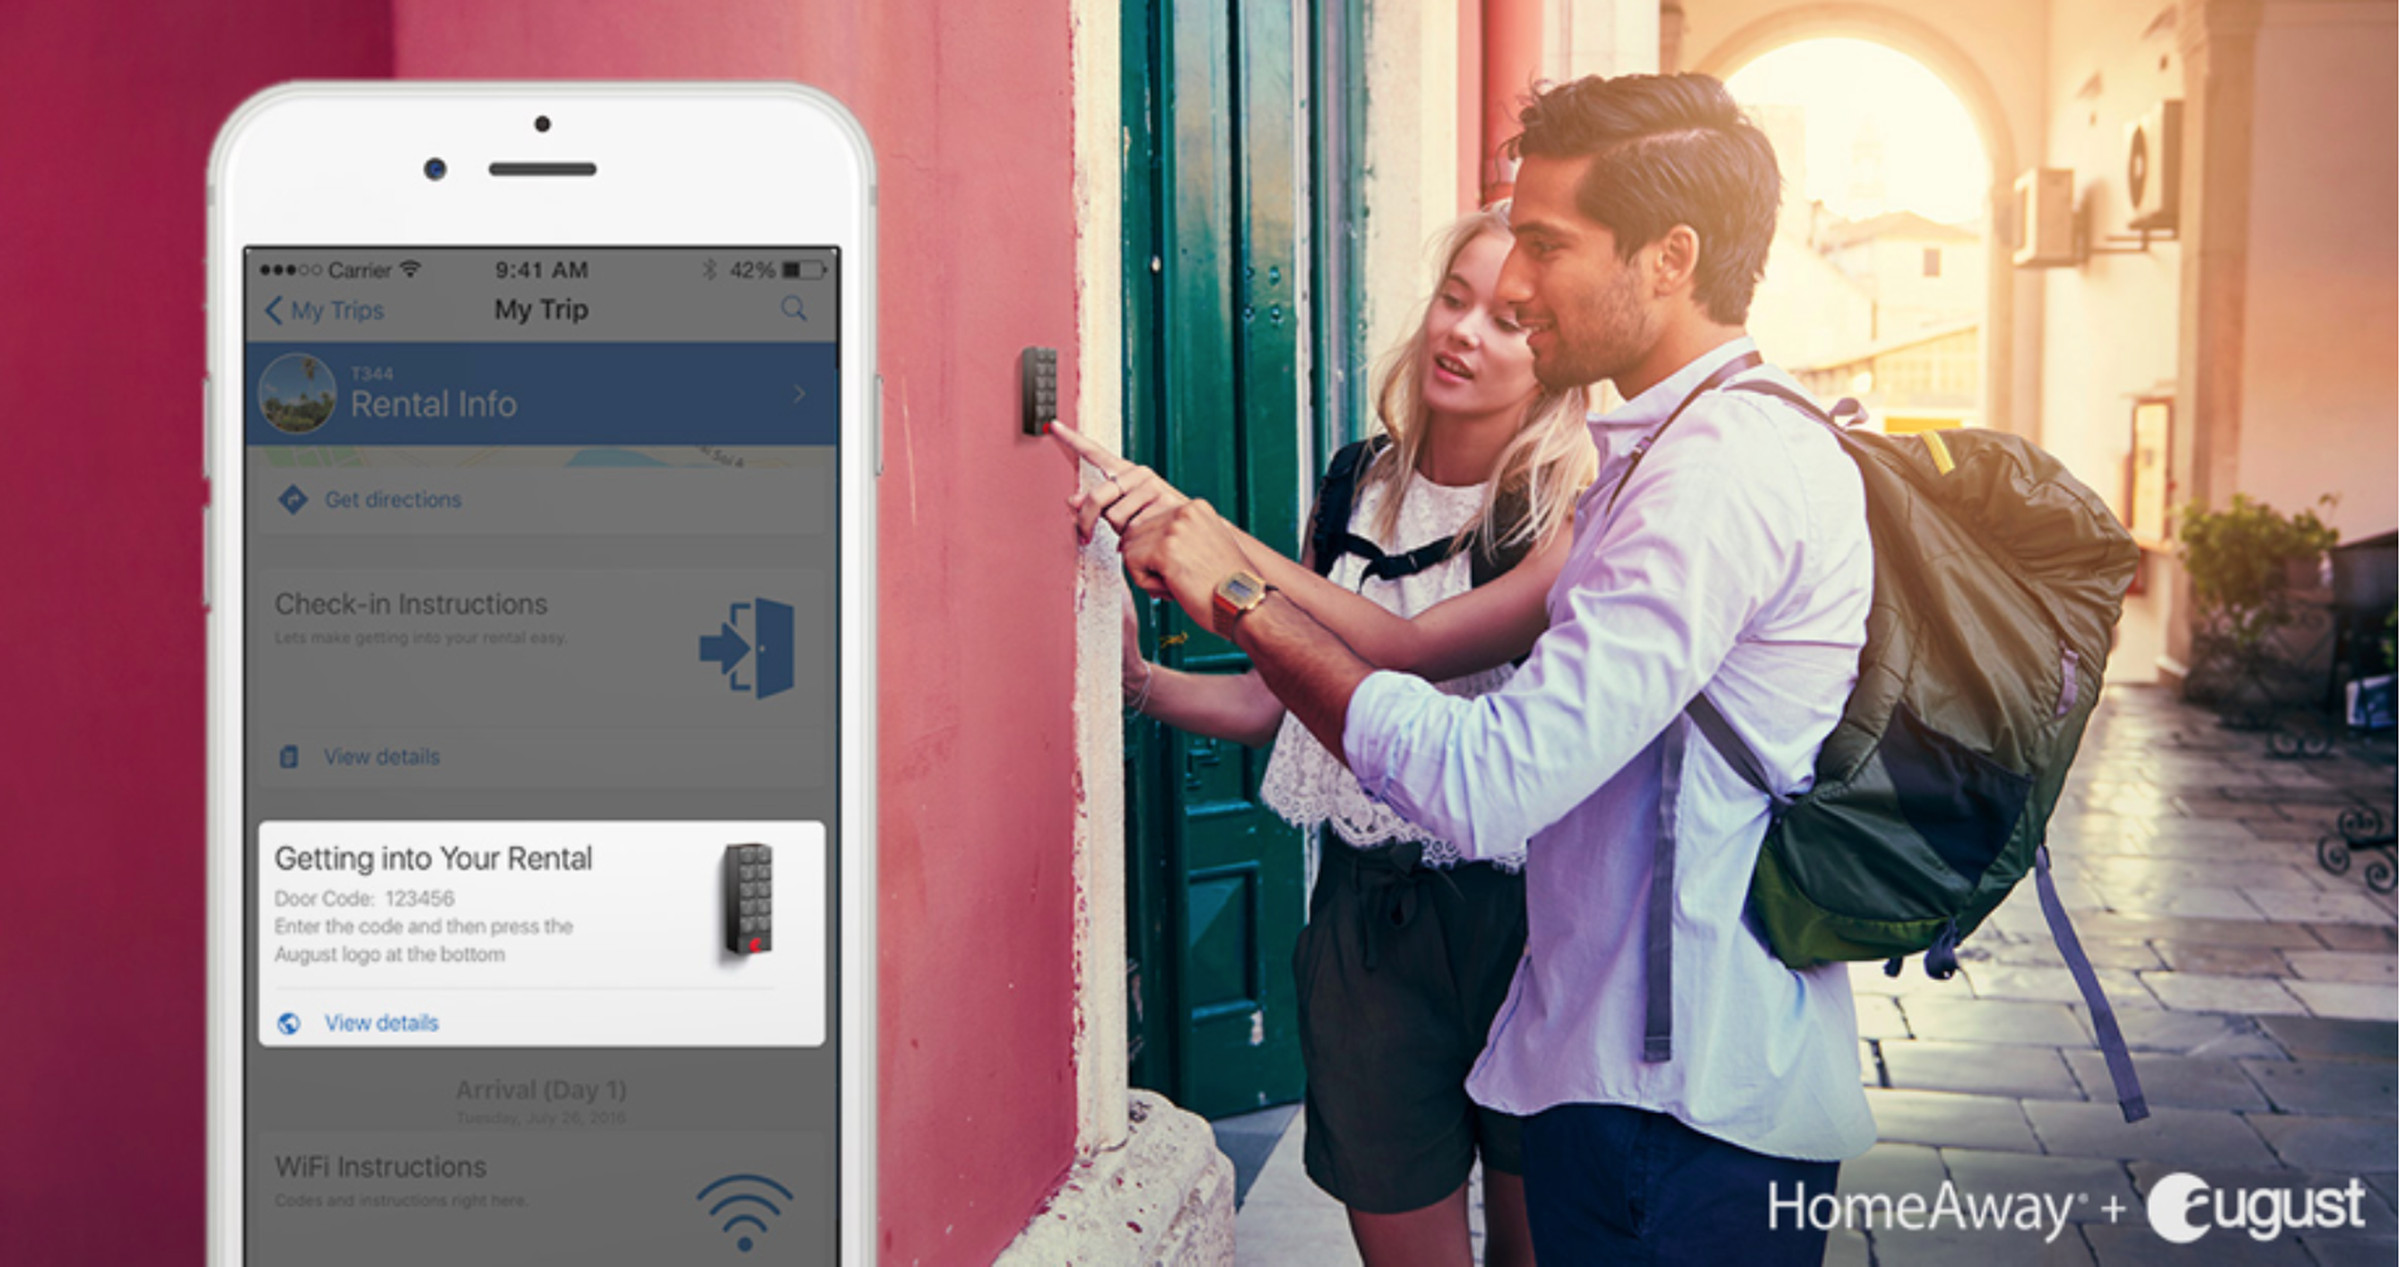 August / HomeAway integration